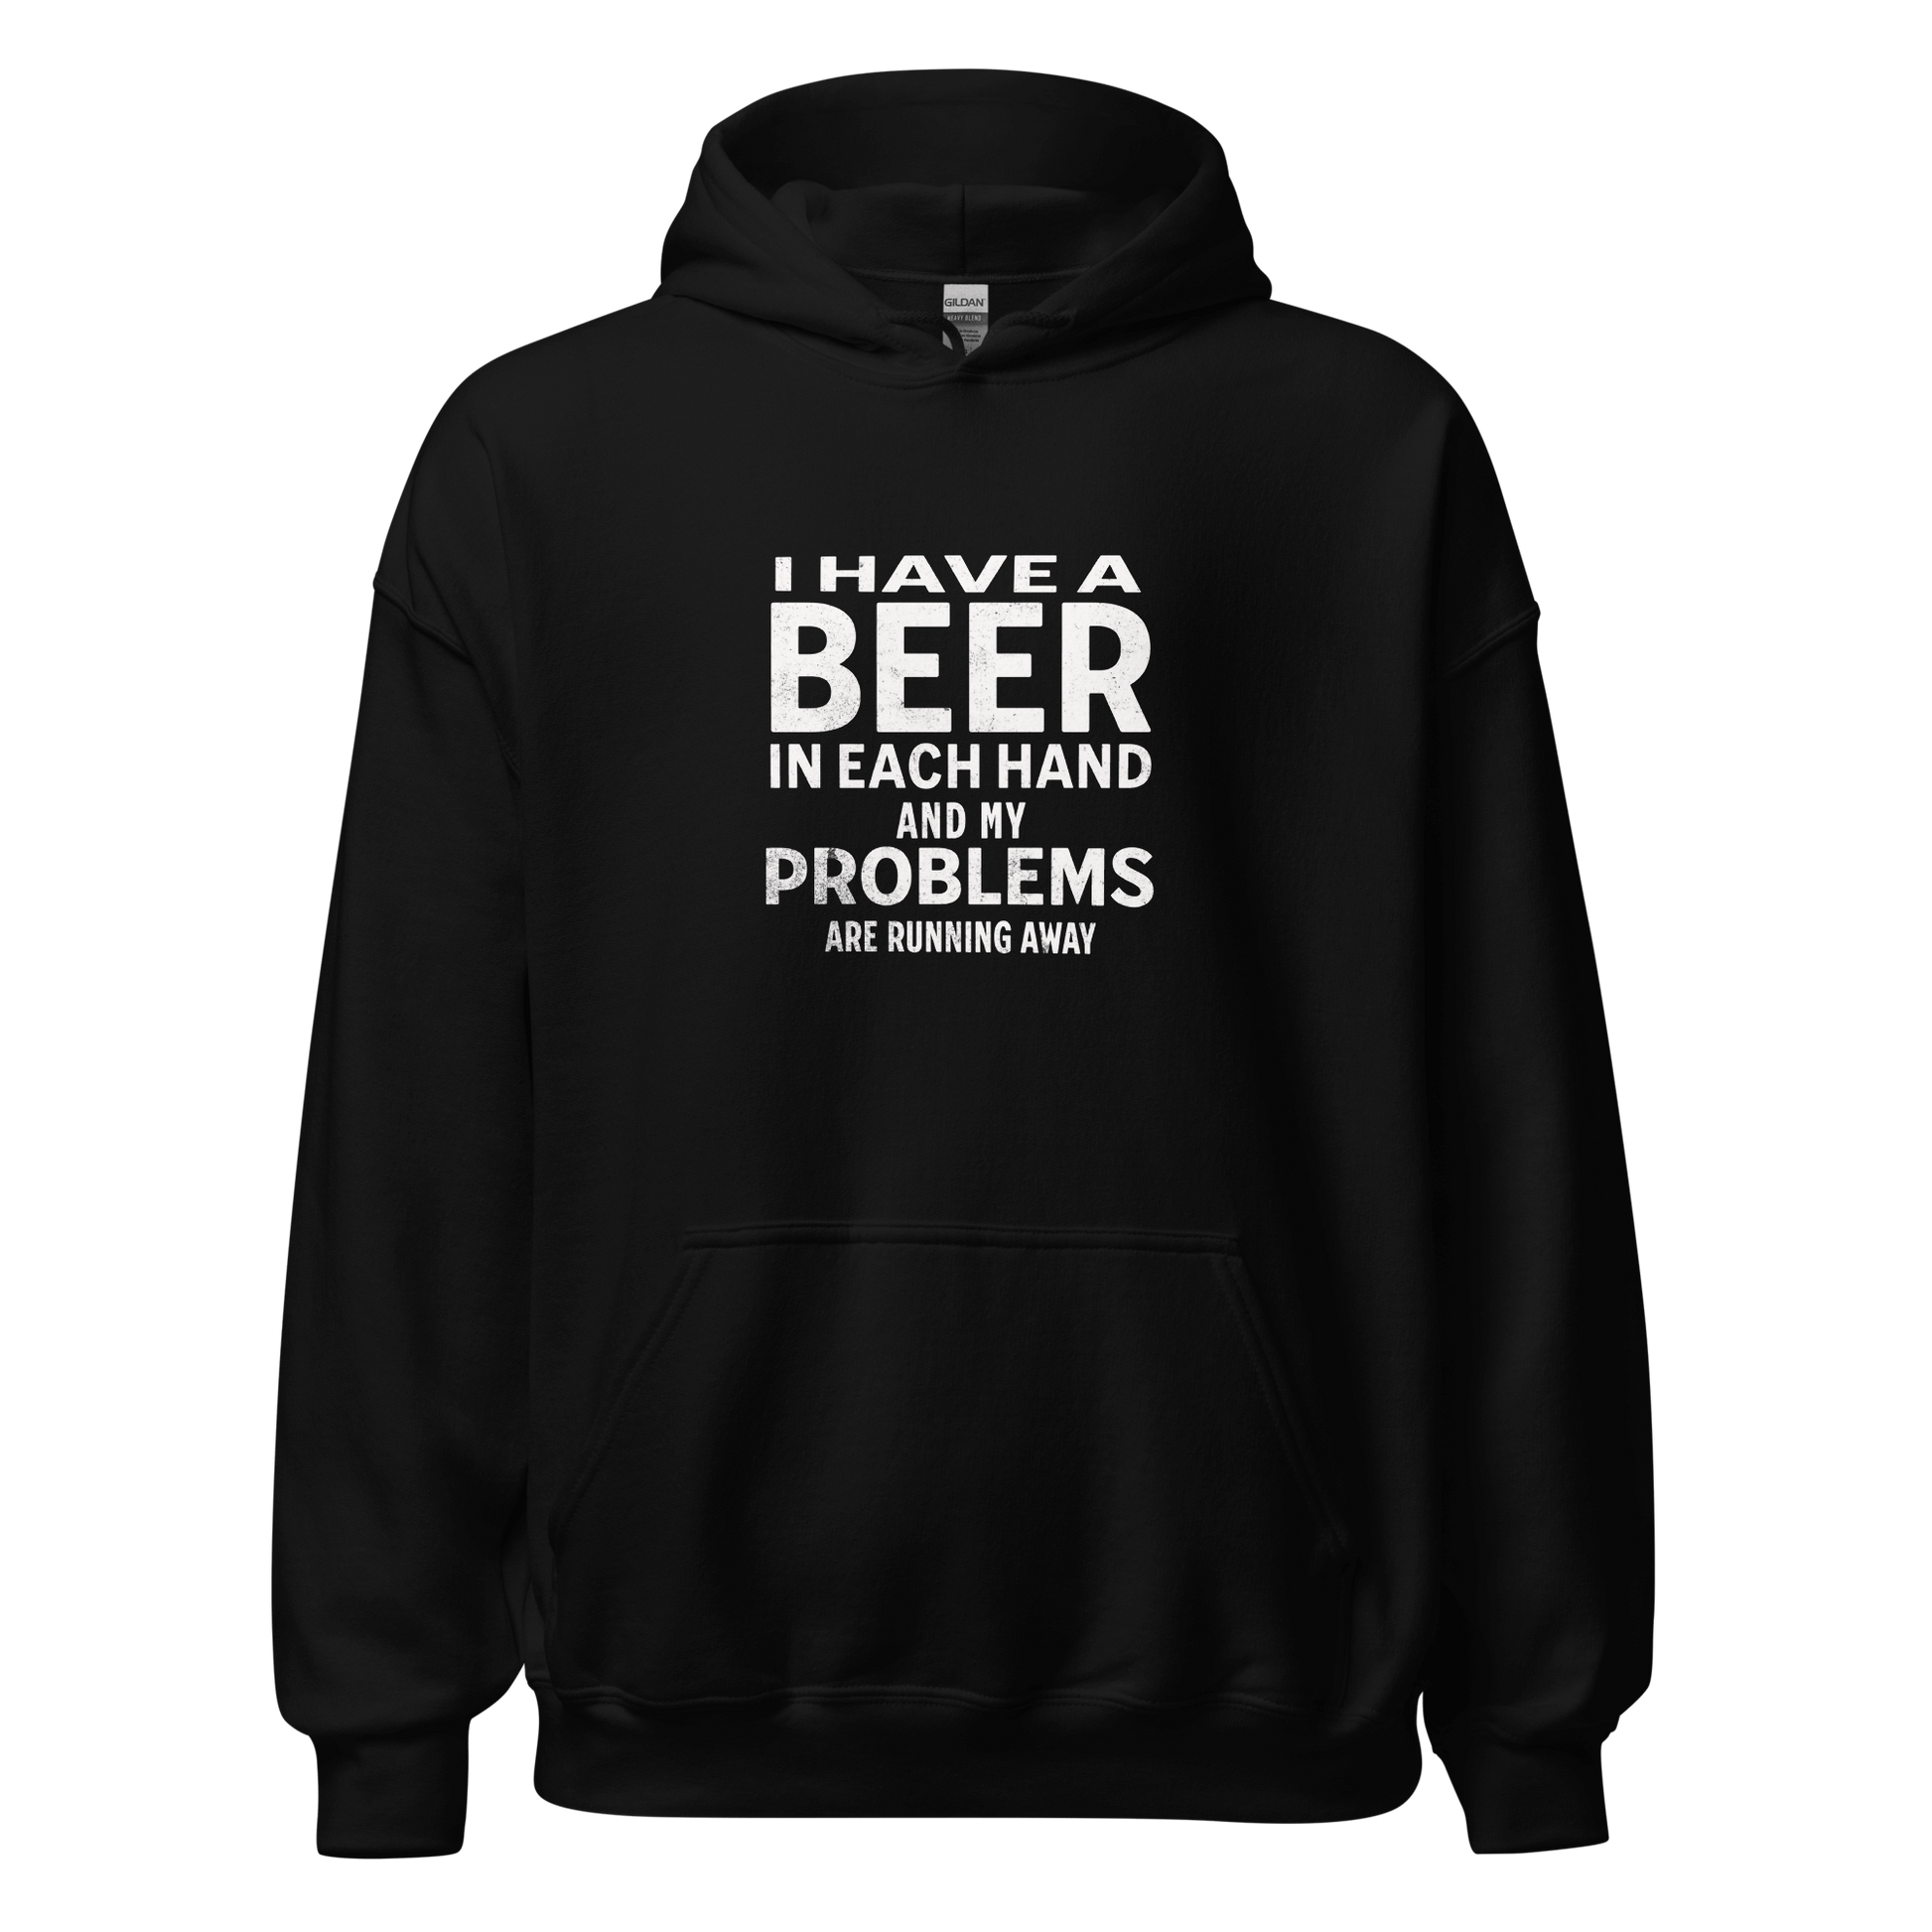 I Have a Beer in Each Hand Hoodie